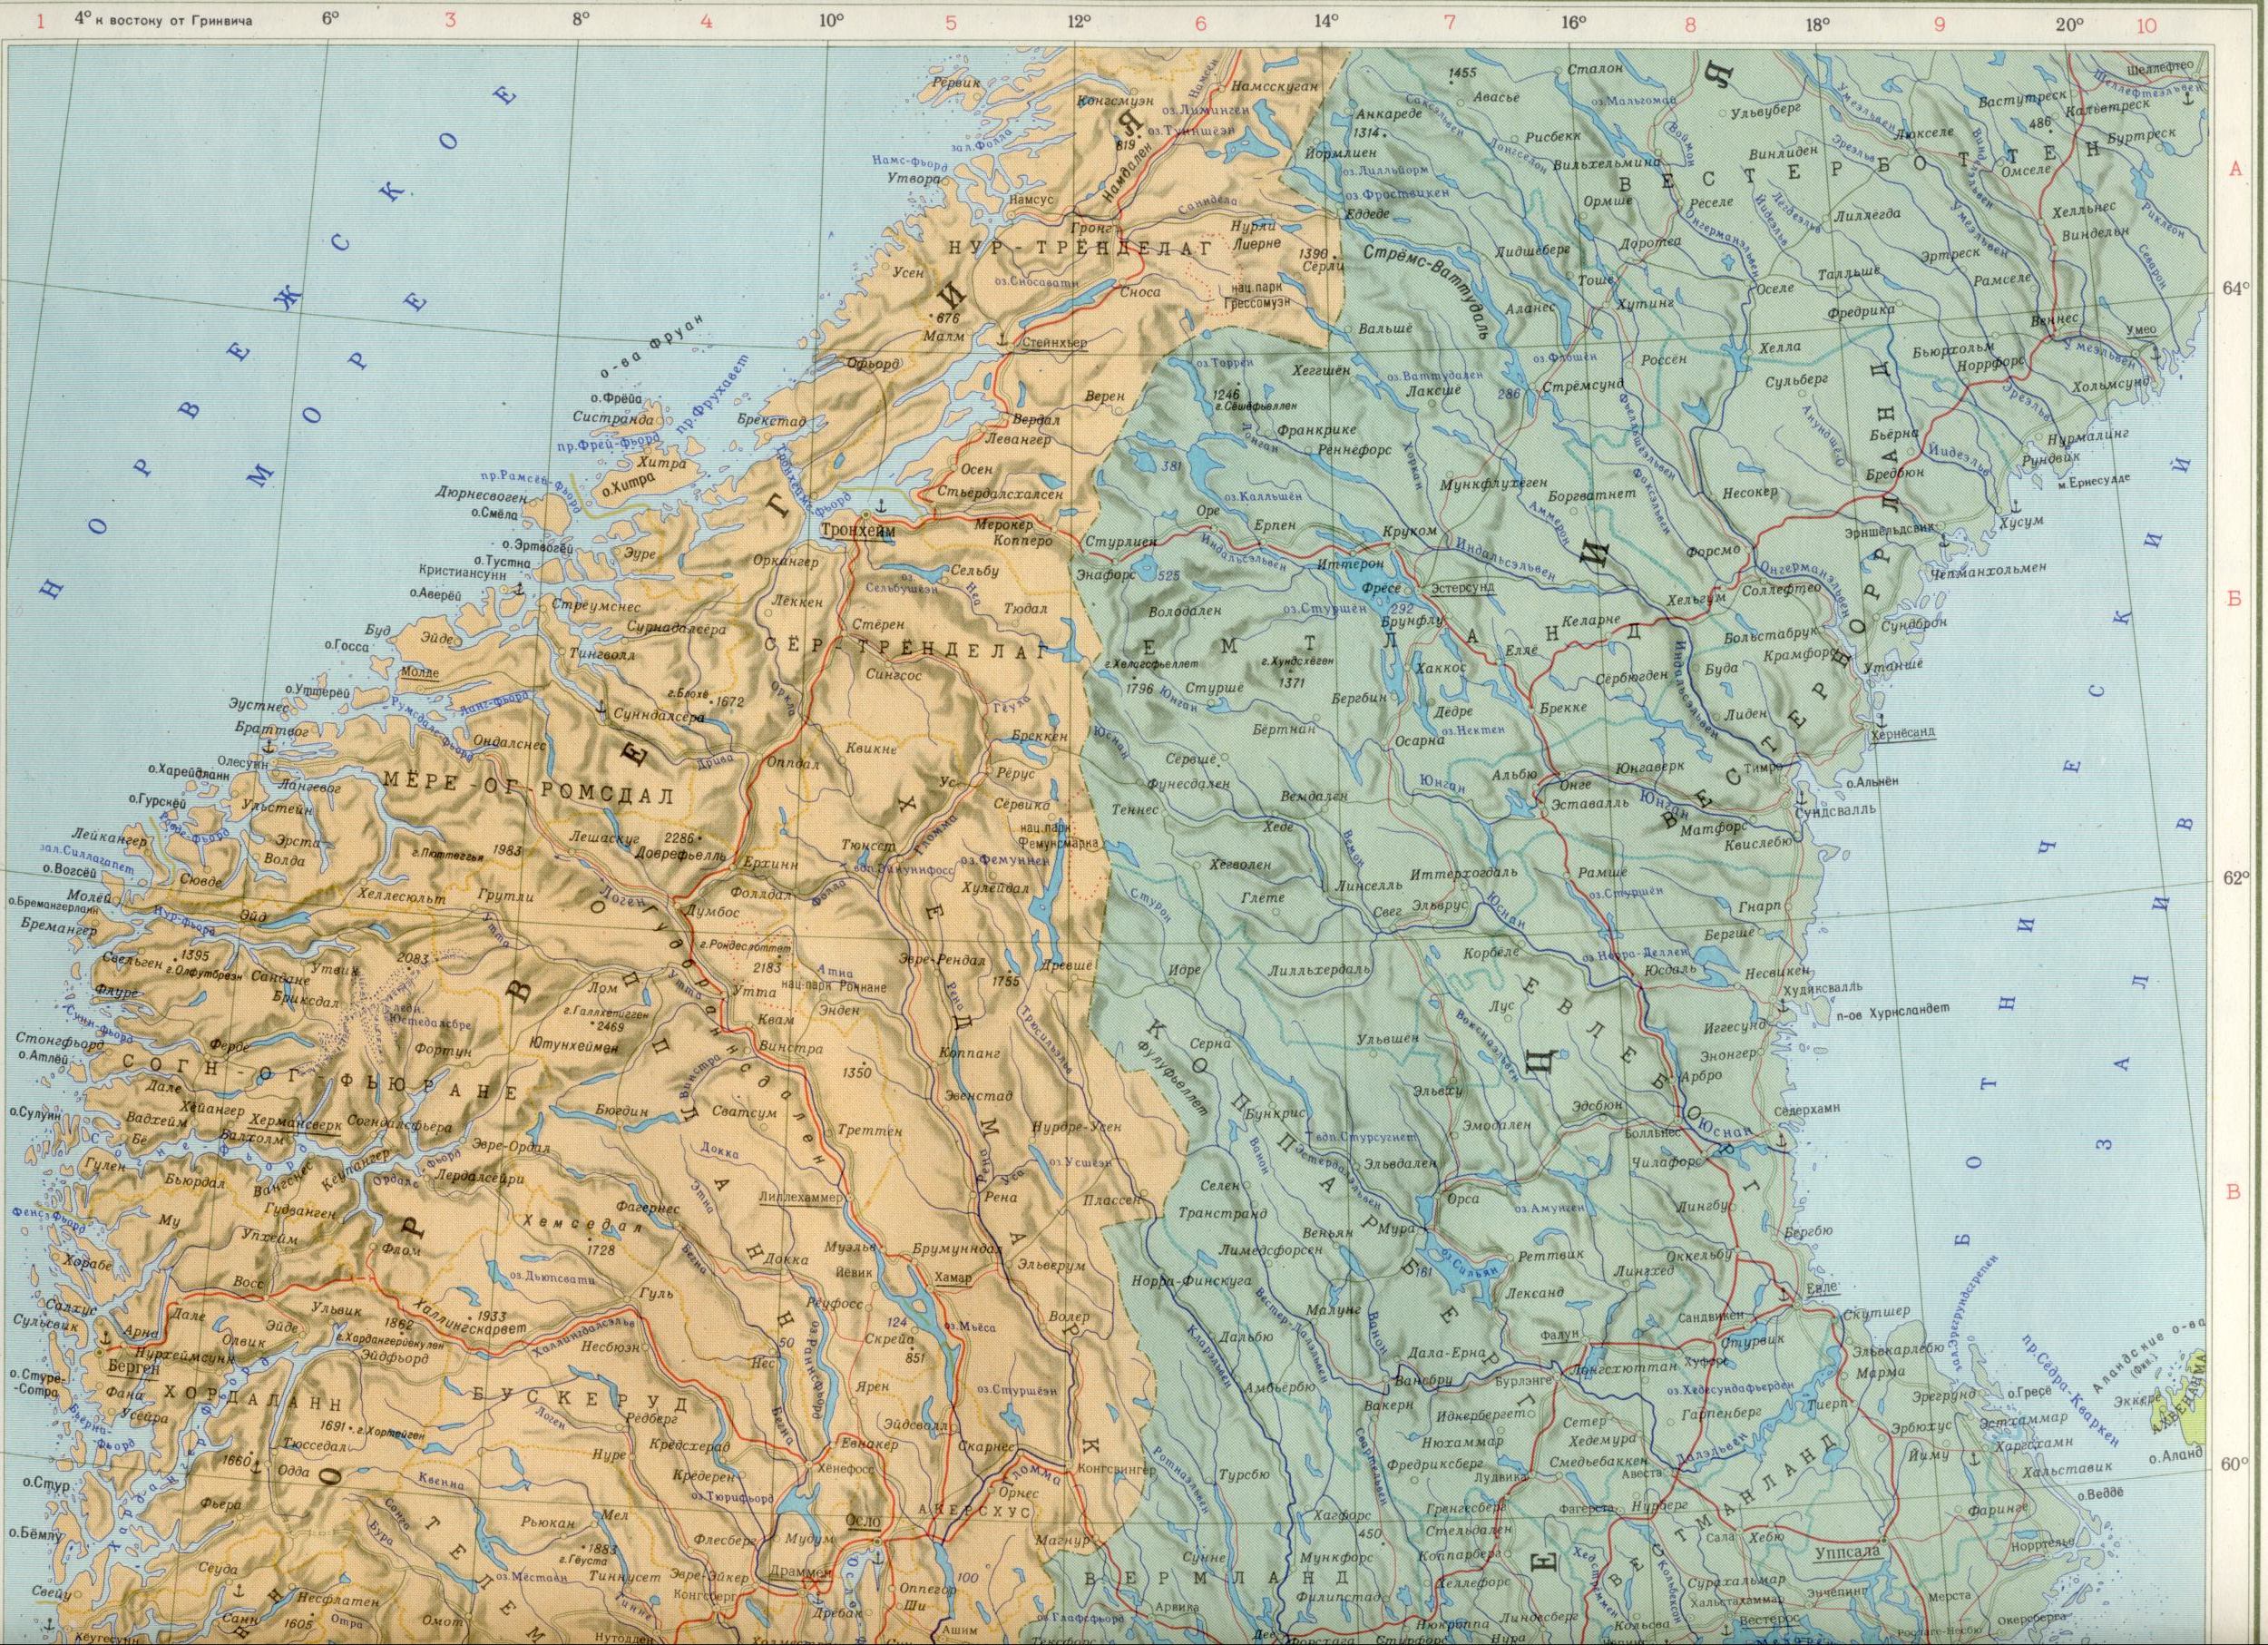 Map of Denmark, Sweden, Norway 1cm = 30km. Download free political maps of Europe